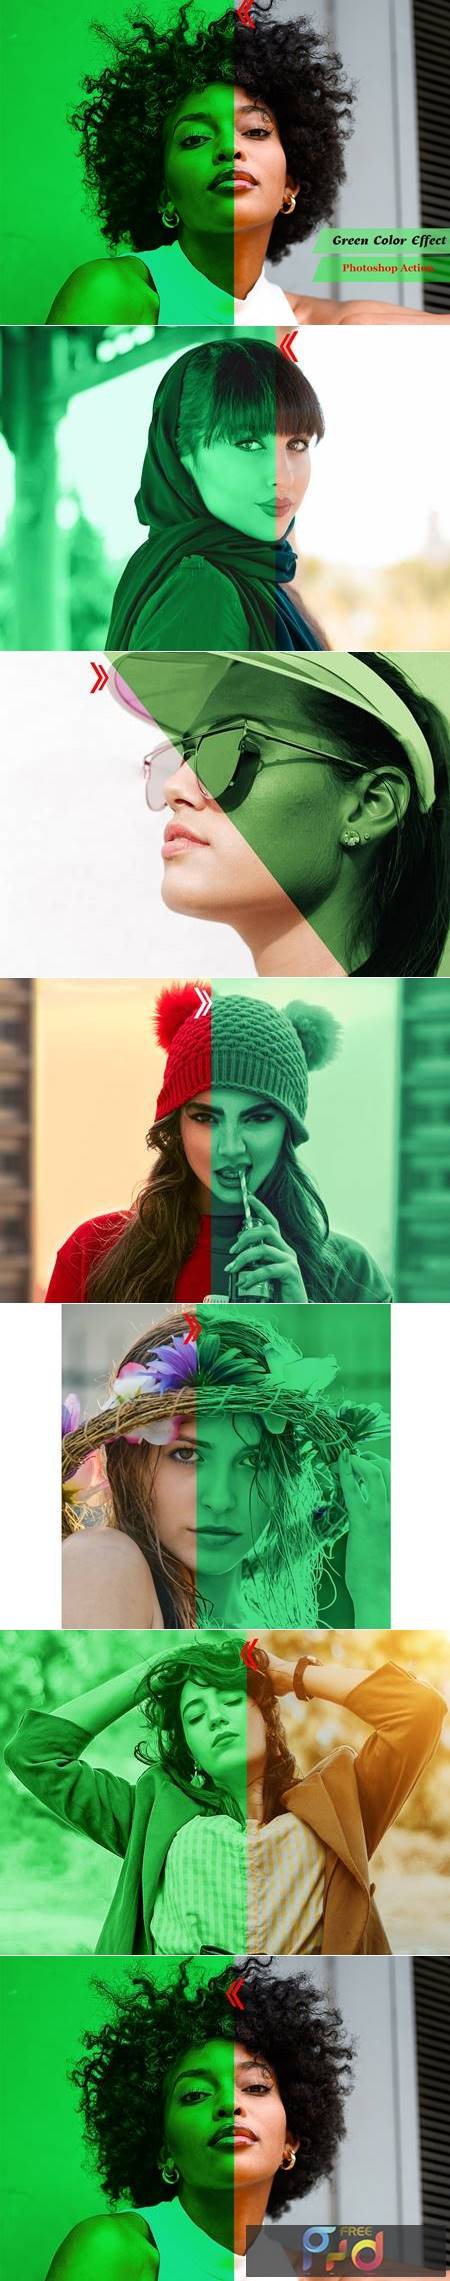 Green Color Effect Photoshop Action 4939667 1